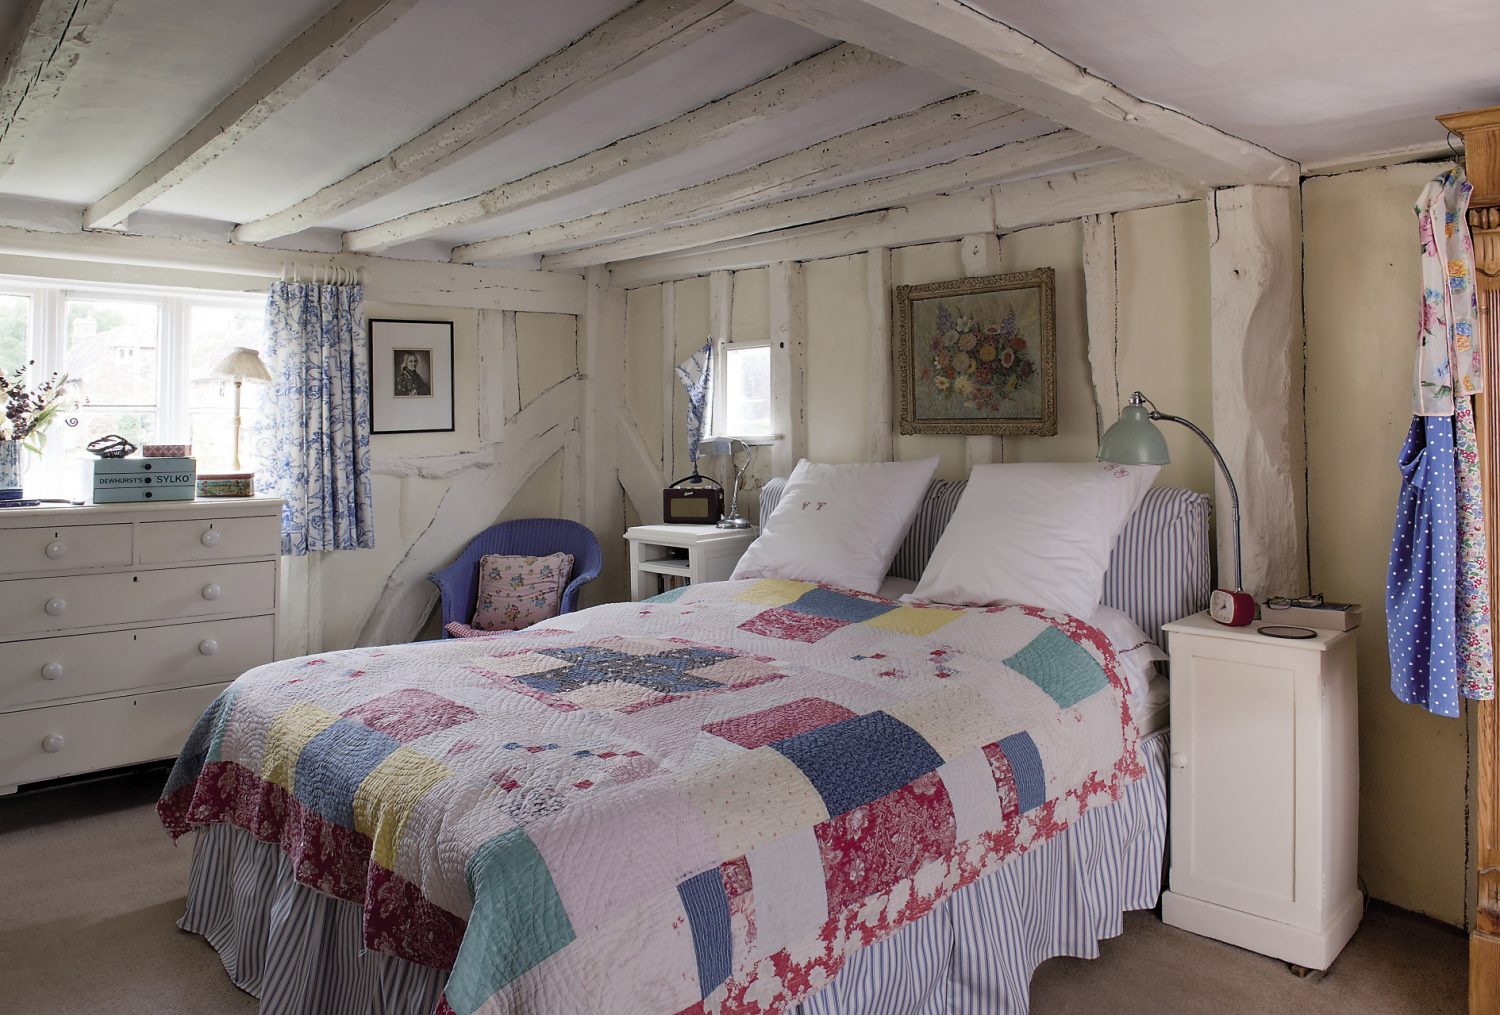 The bedrooms are full of vintage charm, with wonderful old patchwork quilts being used as wall hangings. On the beds are glorious quilts and, dotted among hats, scarves and bedroom bits and bobs are yet more neat piles of quaint old fabrics